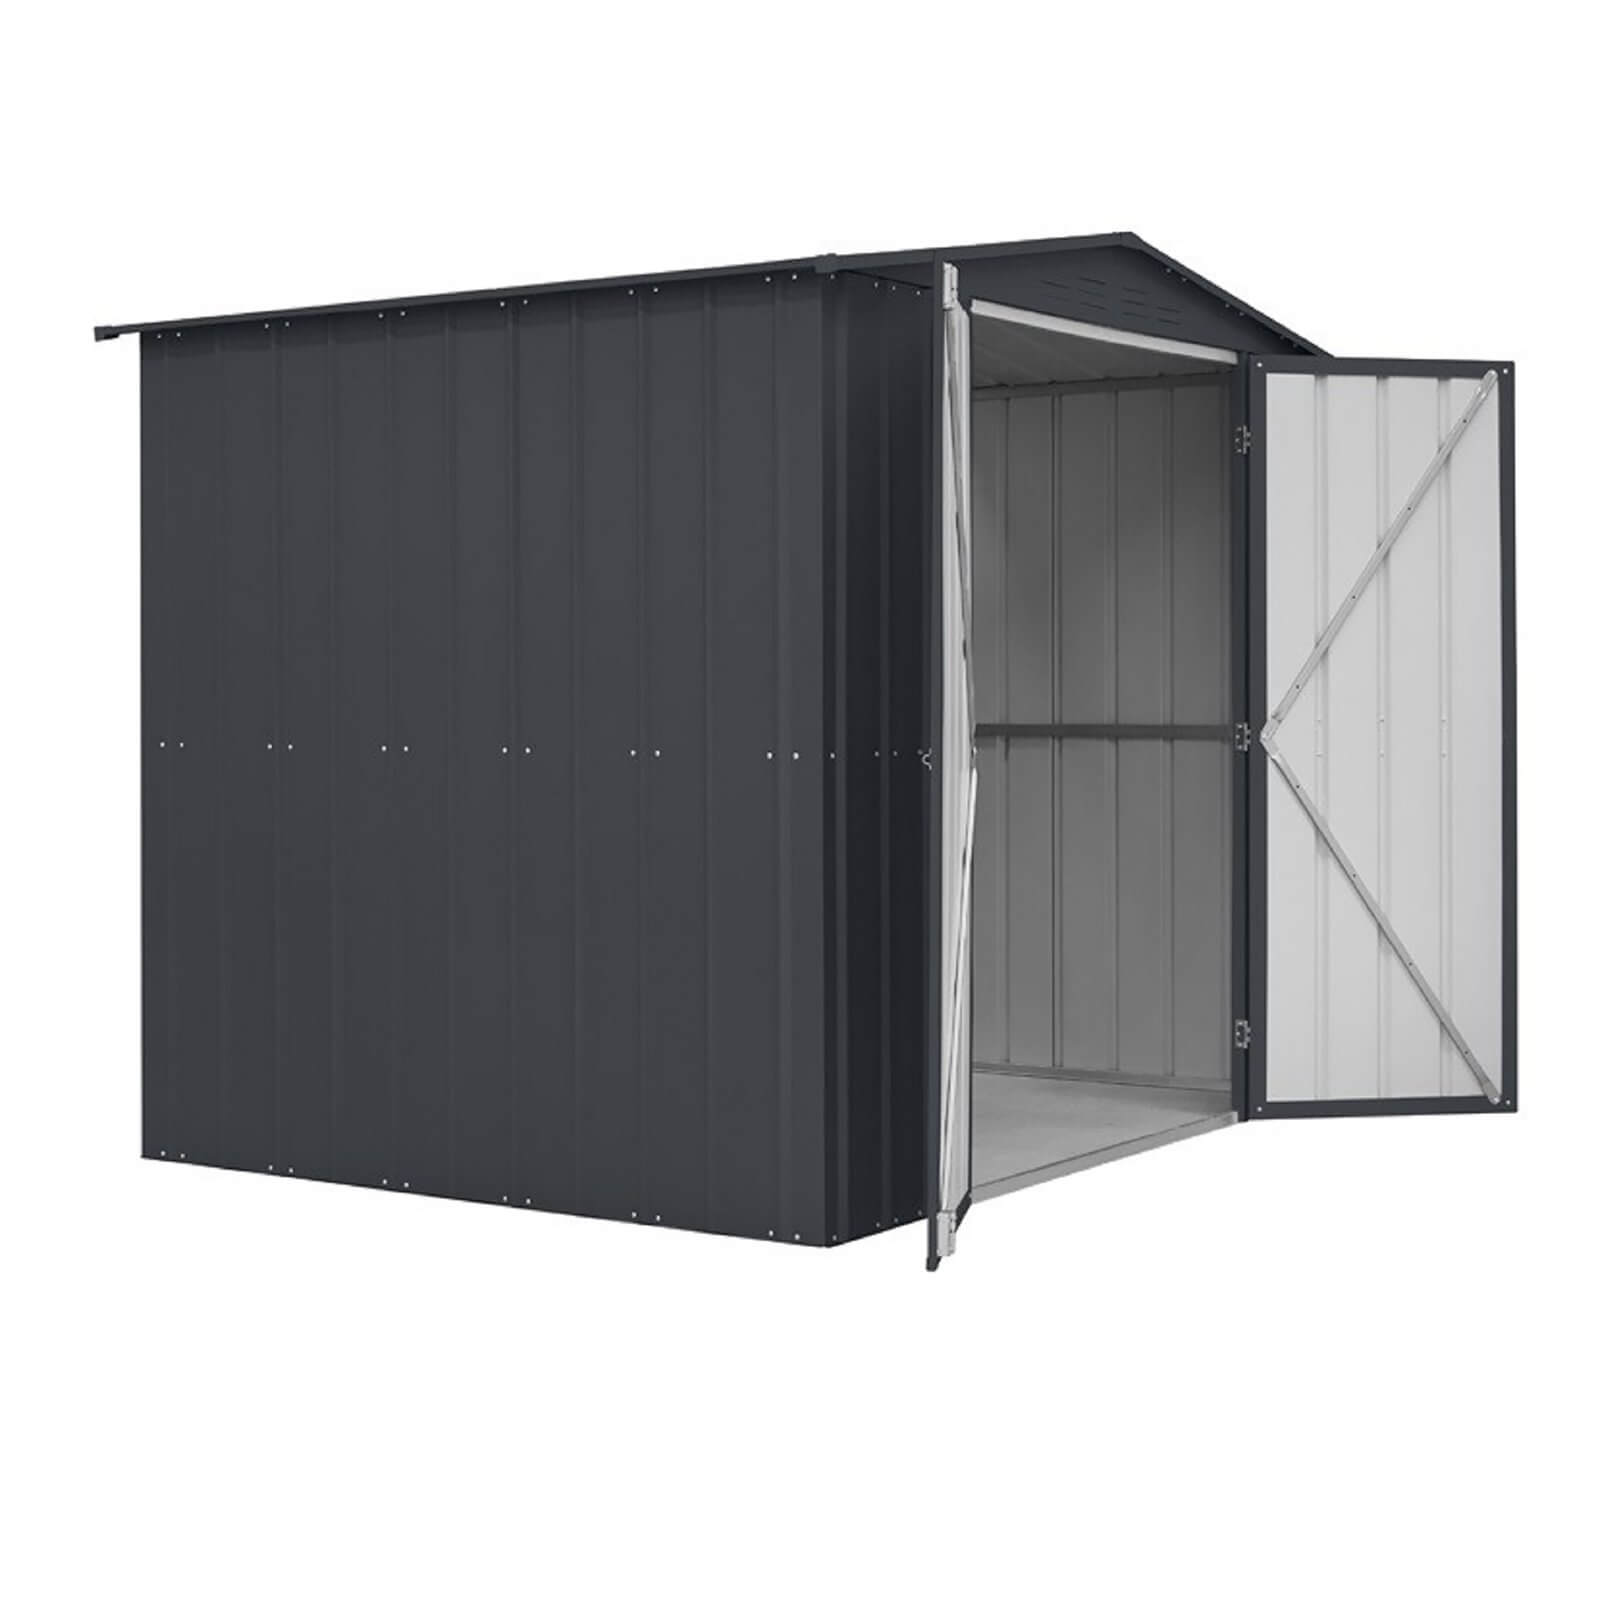 Lotus 8x6ft Double Hinged Shed - Anthracite Grey